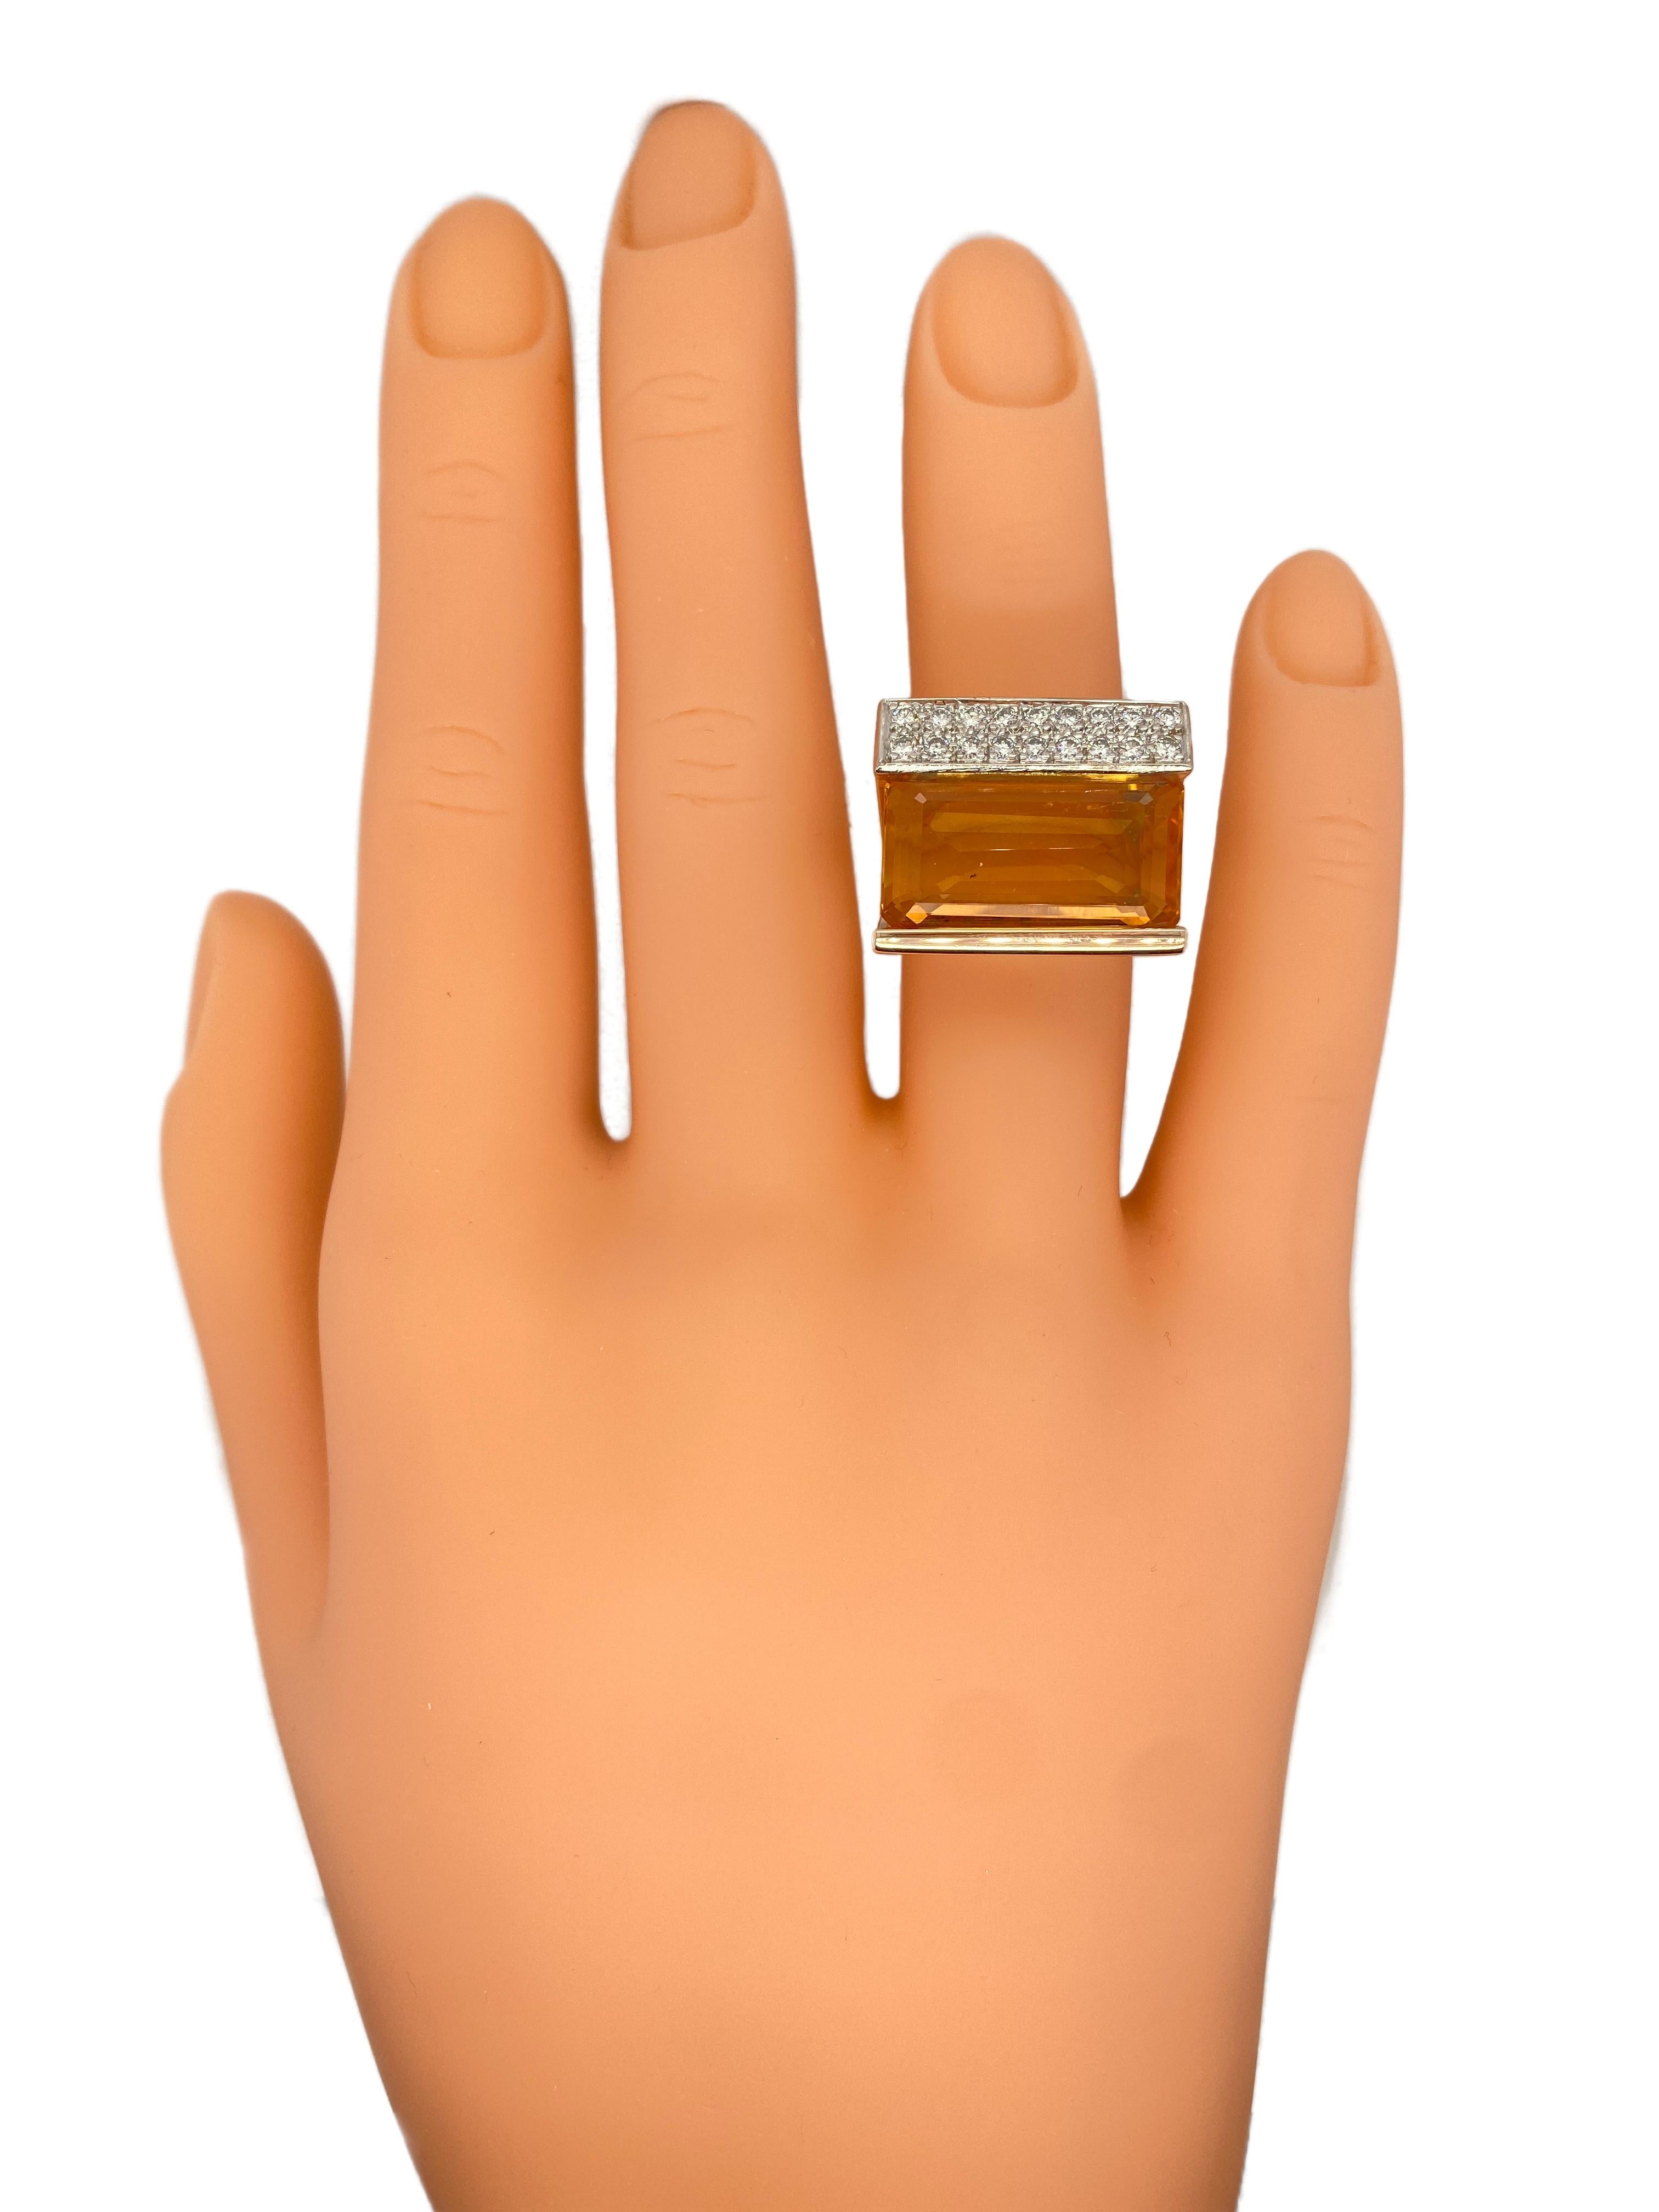 Circa 1960s Retro 8.7 Carat Citrine and Diamond Bar Ring in 14K Gold In Good Condition For Sale In Addison, TX